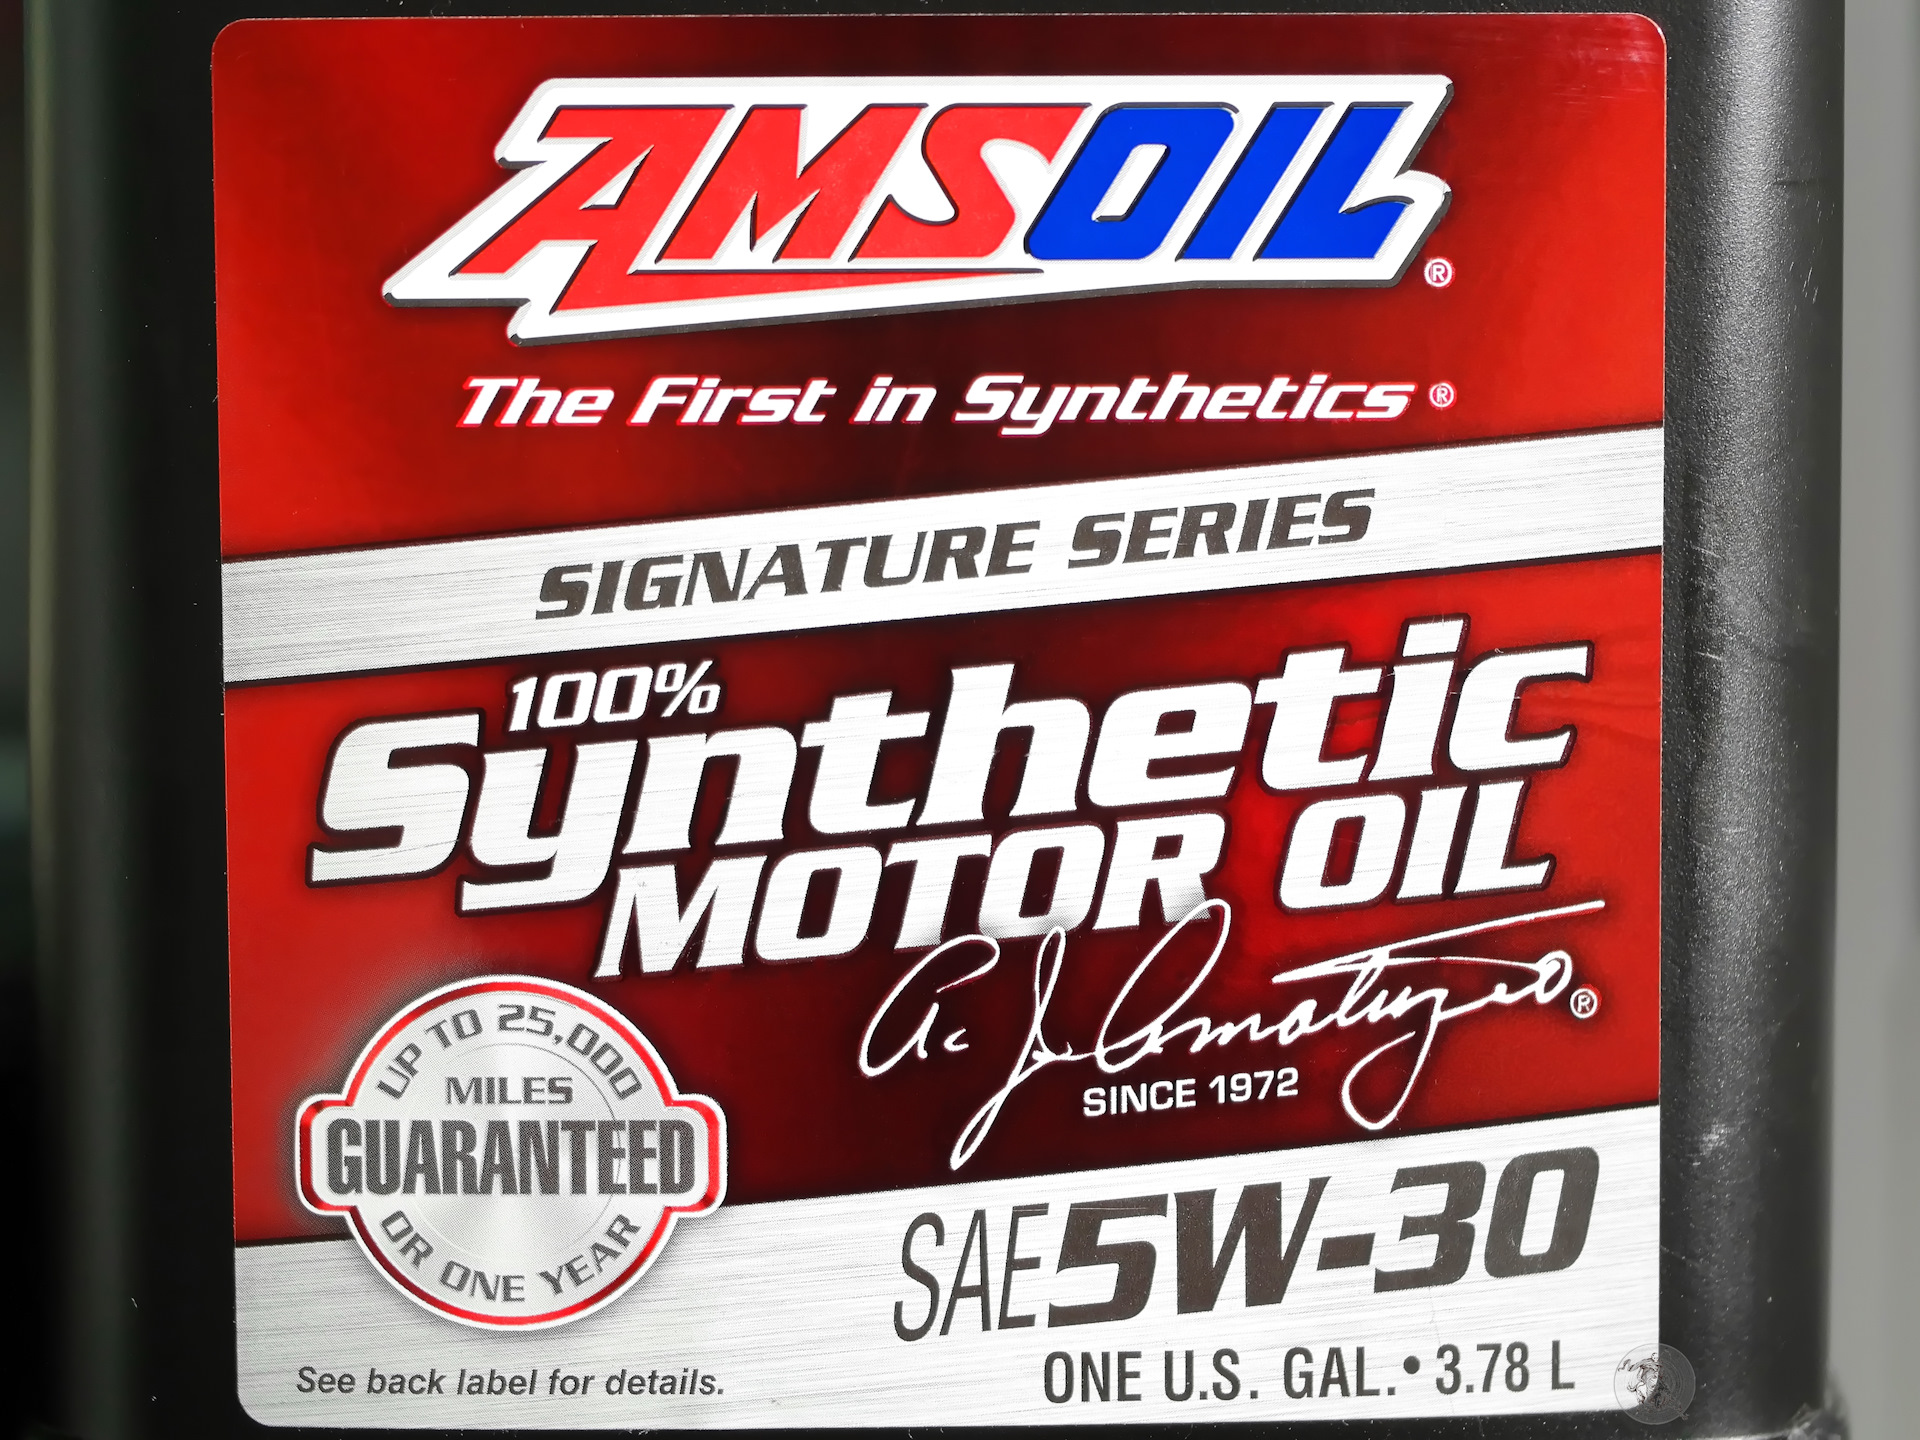 Amsoil signature series synthetic. AMSOIL 5w30 Signature. AMSOIL Signature Series 5w-30. AMSOIL Signature Series Synthetic 5w-30. AMSOIL Signature Series 100% Synthetic 5w30 (asl1g),.